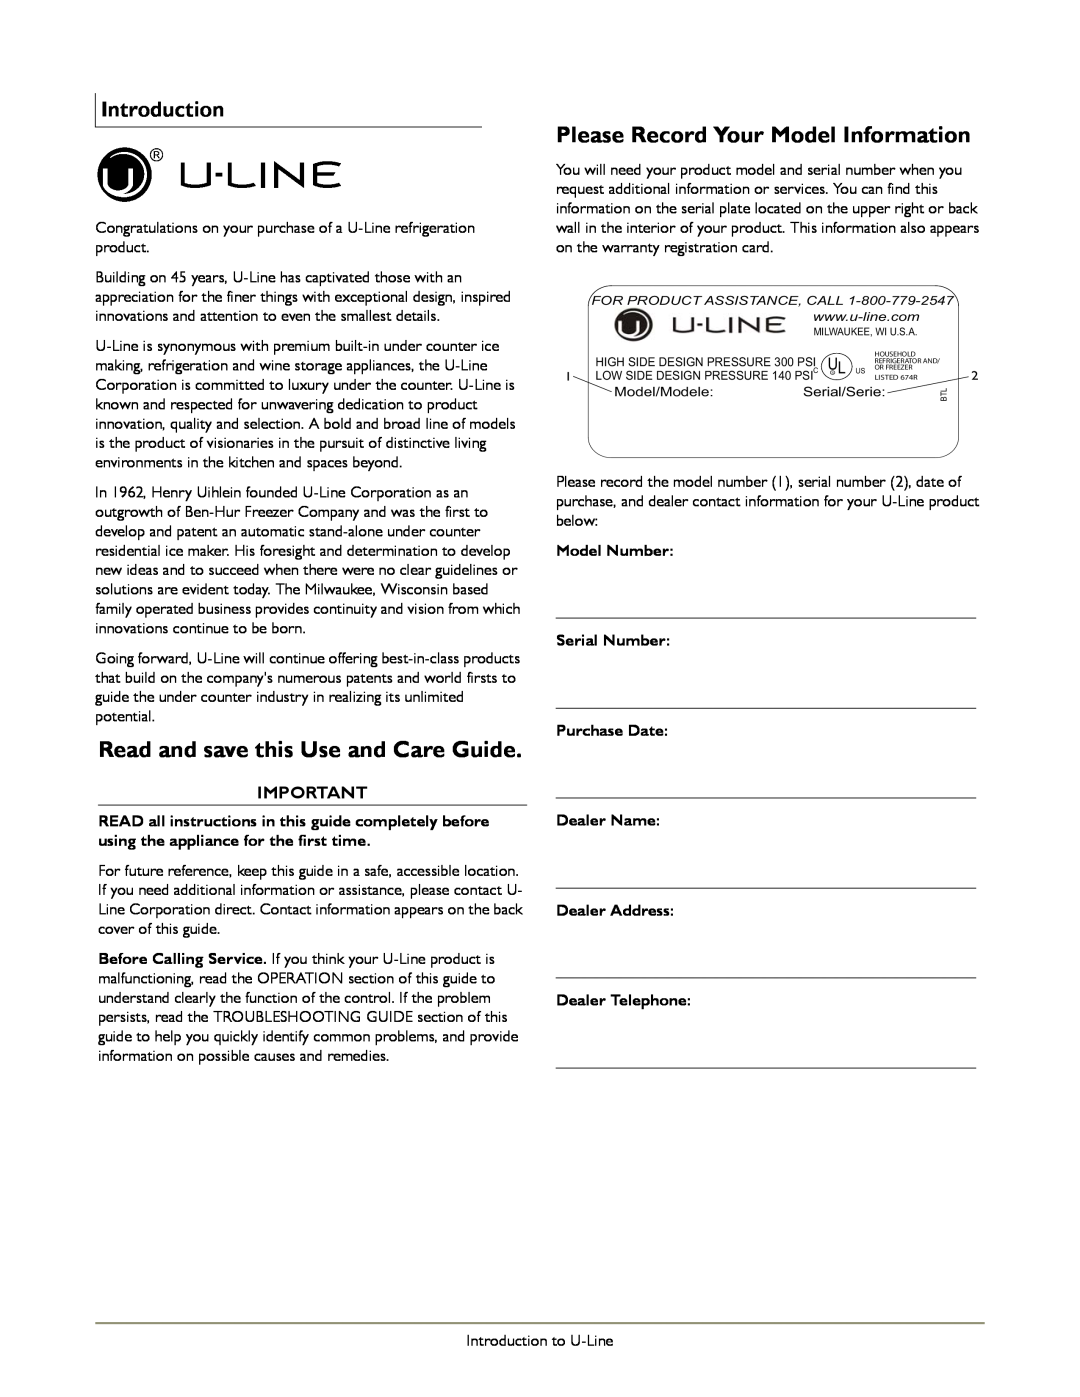 U-Line 1175WC Read and save this Use and Care Guide, Please Record Your Model Information, Introduction, Model Number 